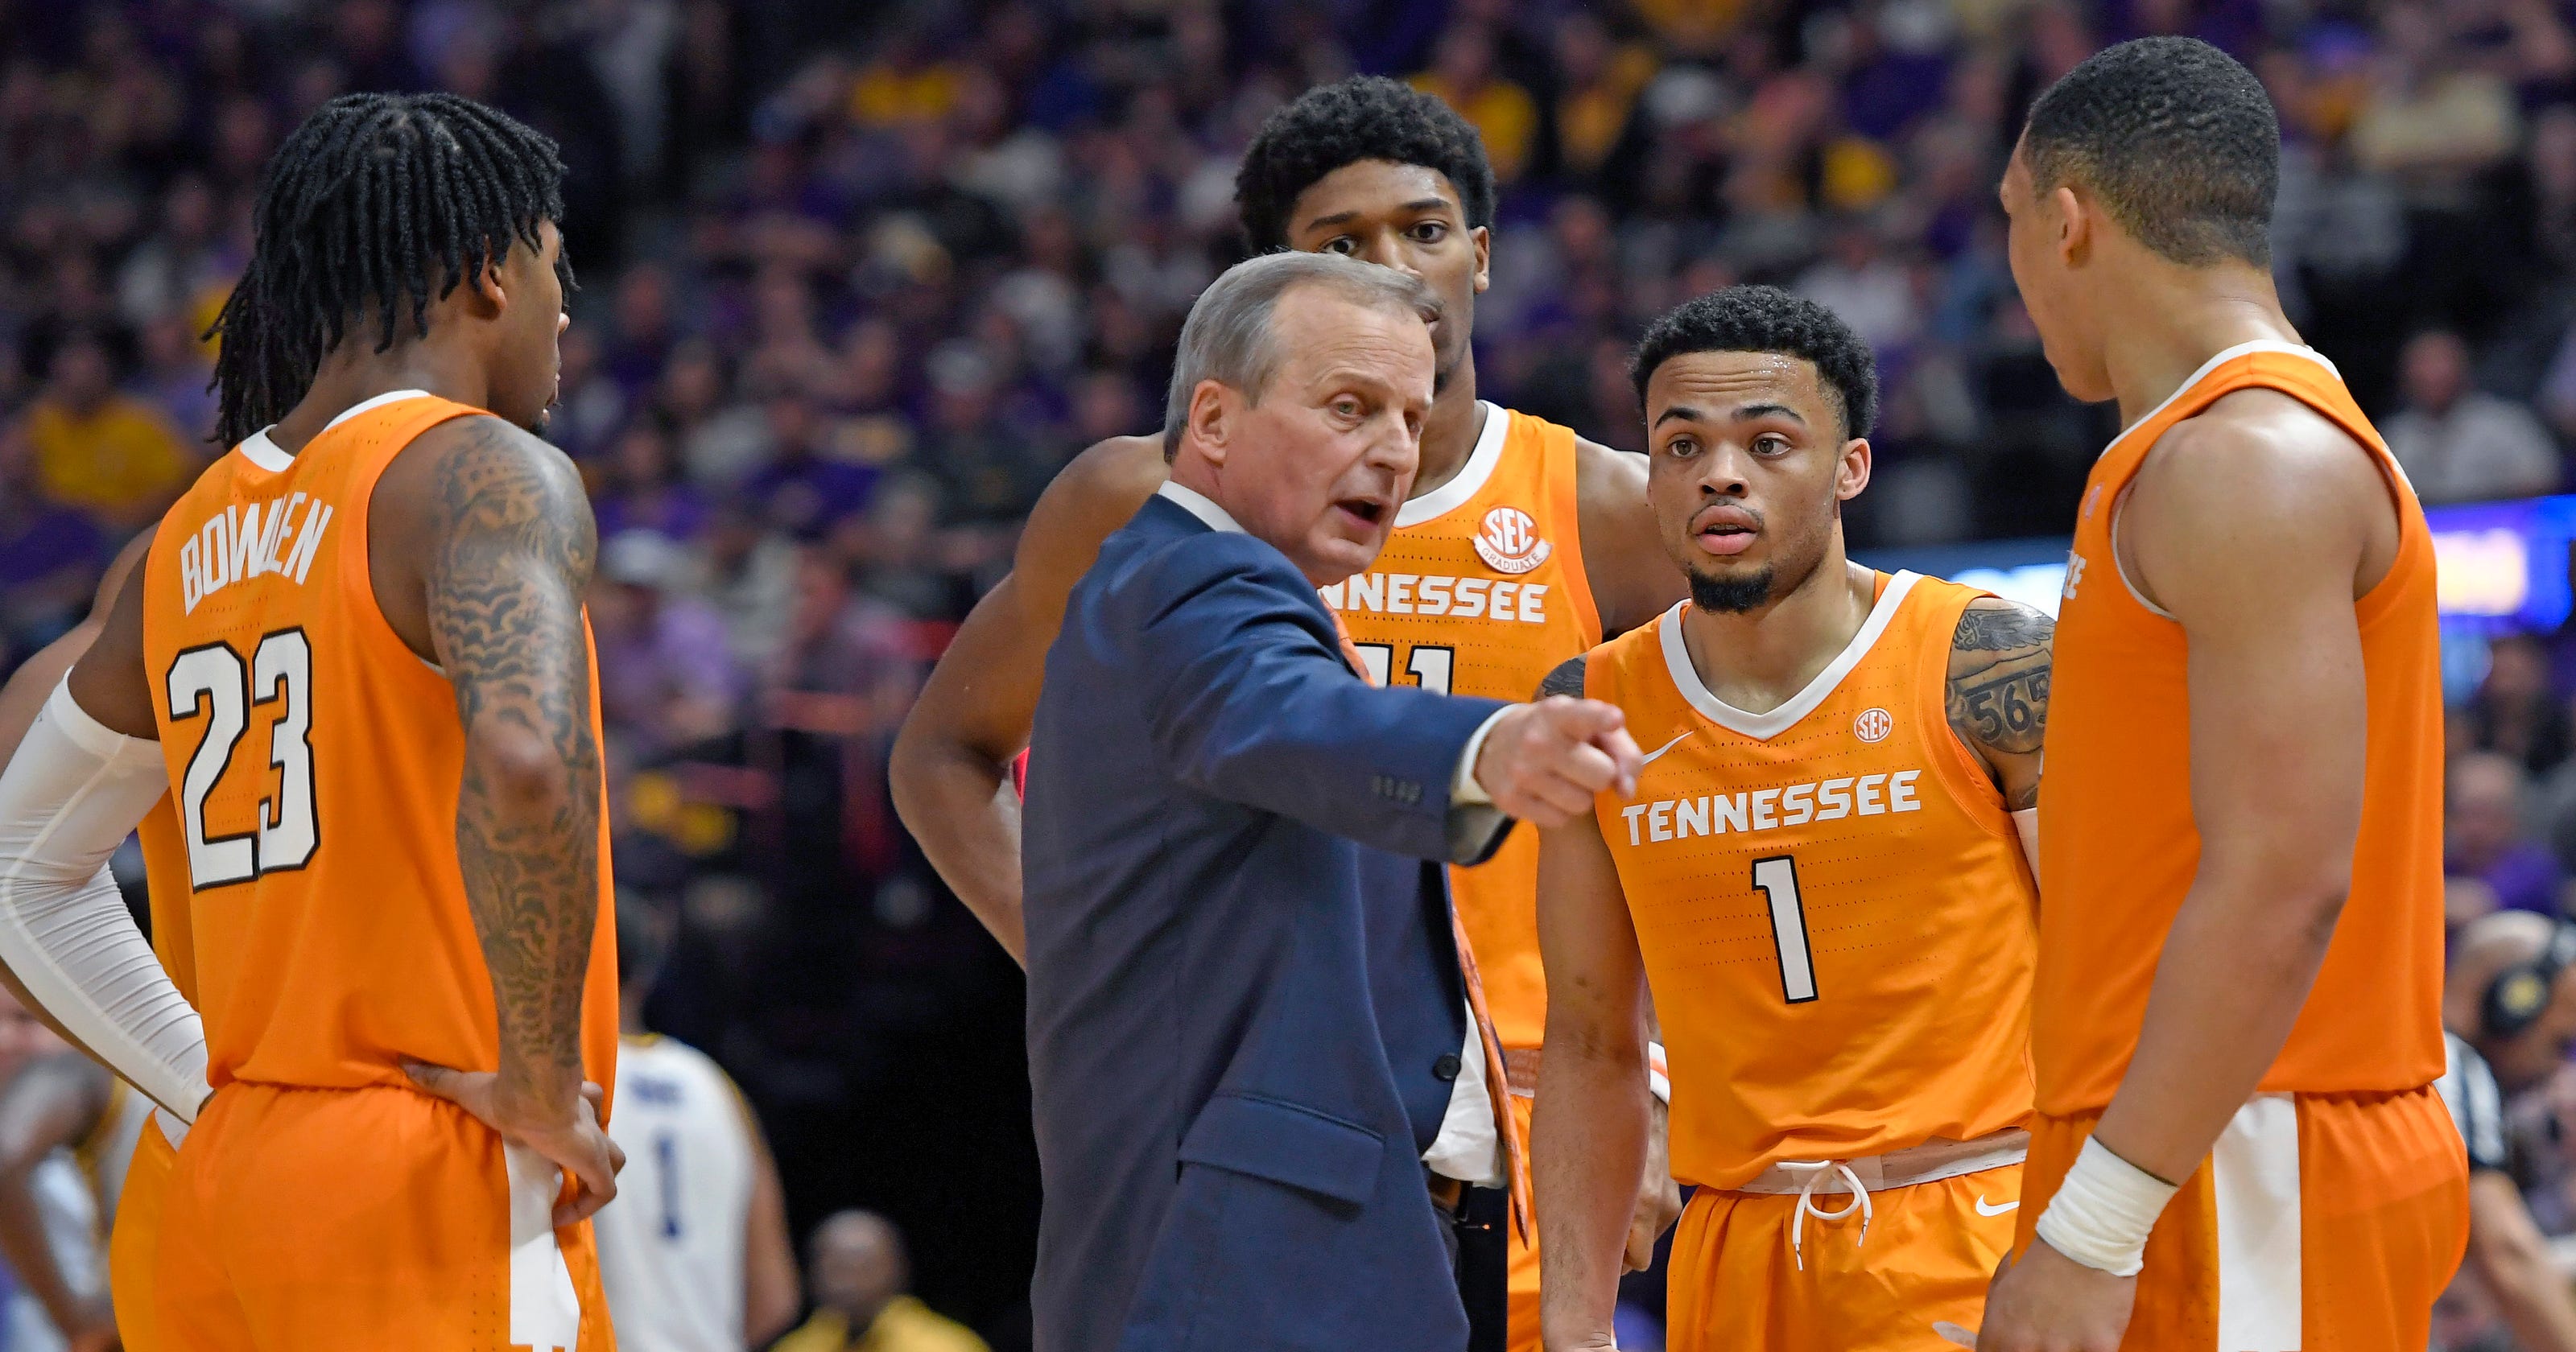 Tennessee basketball's Rick Barnes contacts SEC about LSU game referee